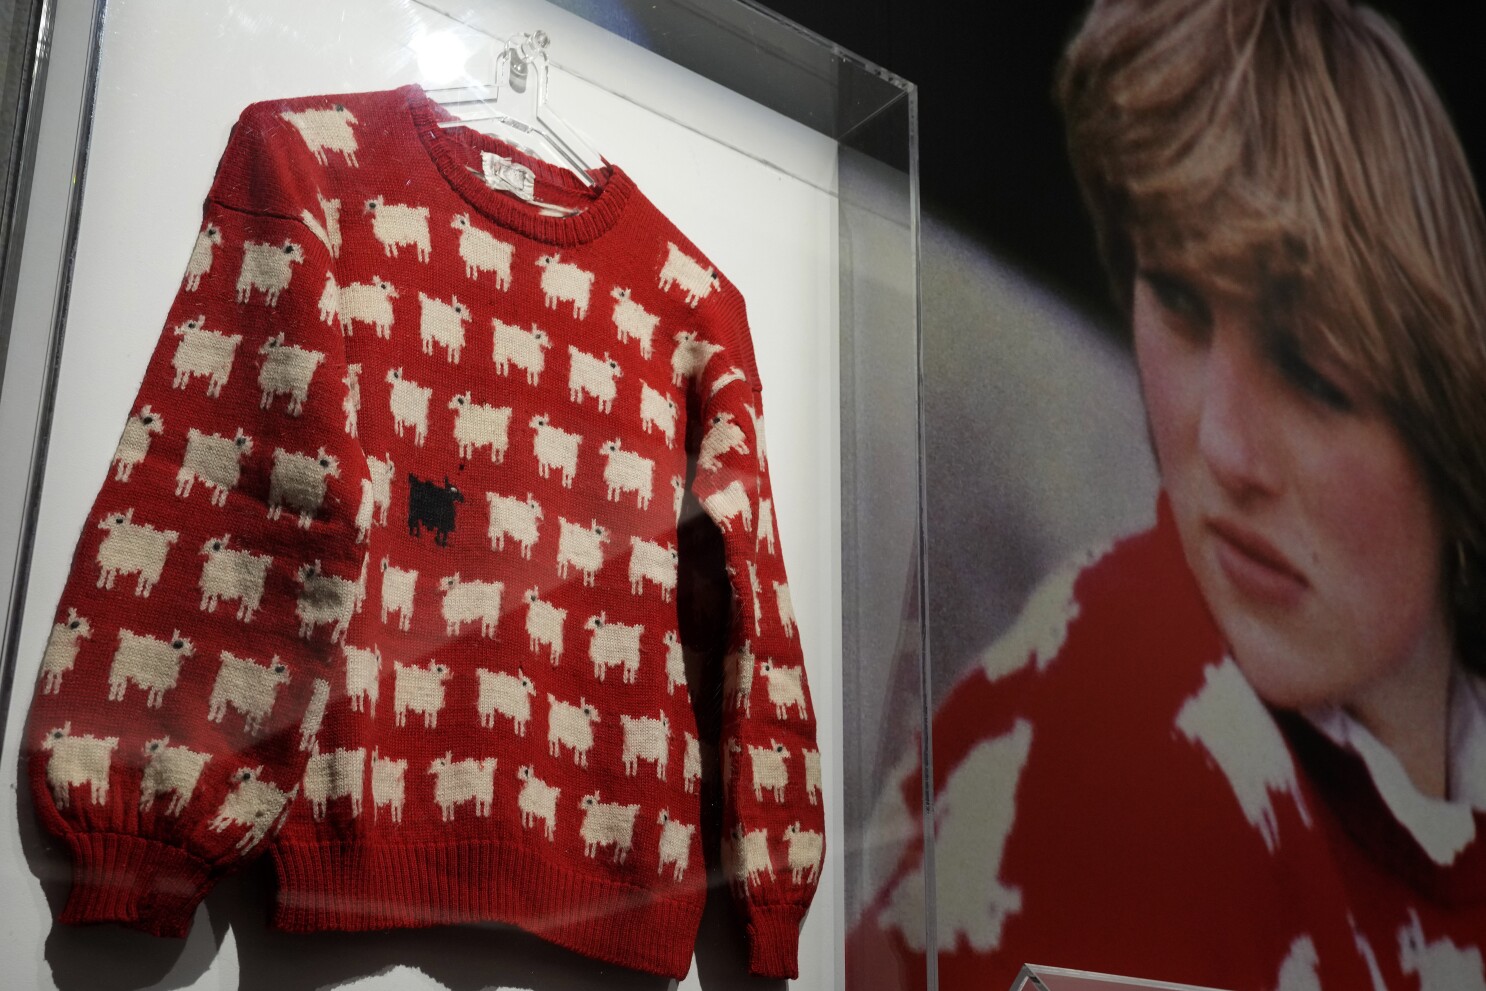 Princess Diana's sheep sweater smashes records to sell for $1.1